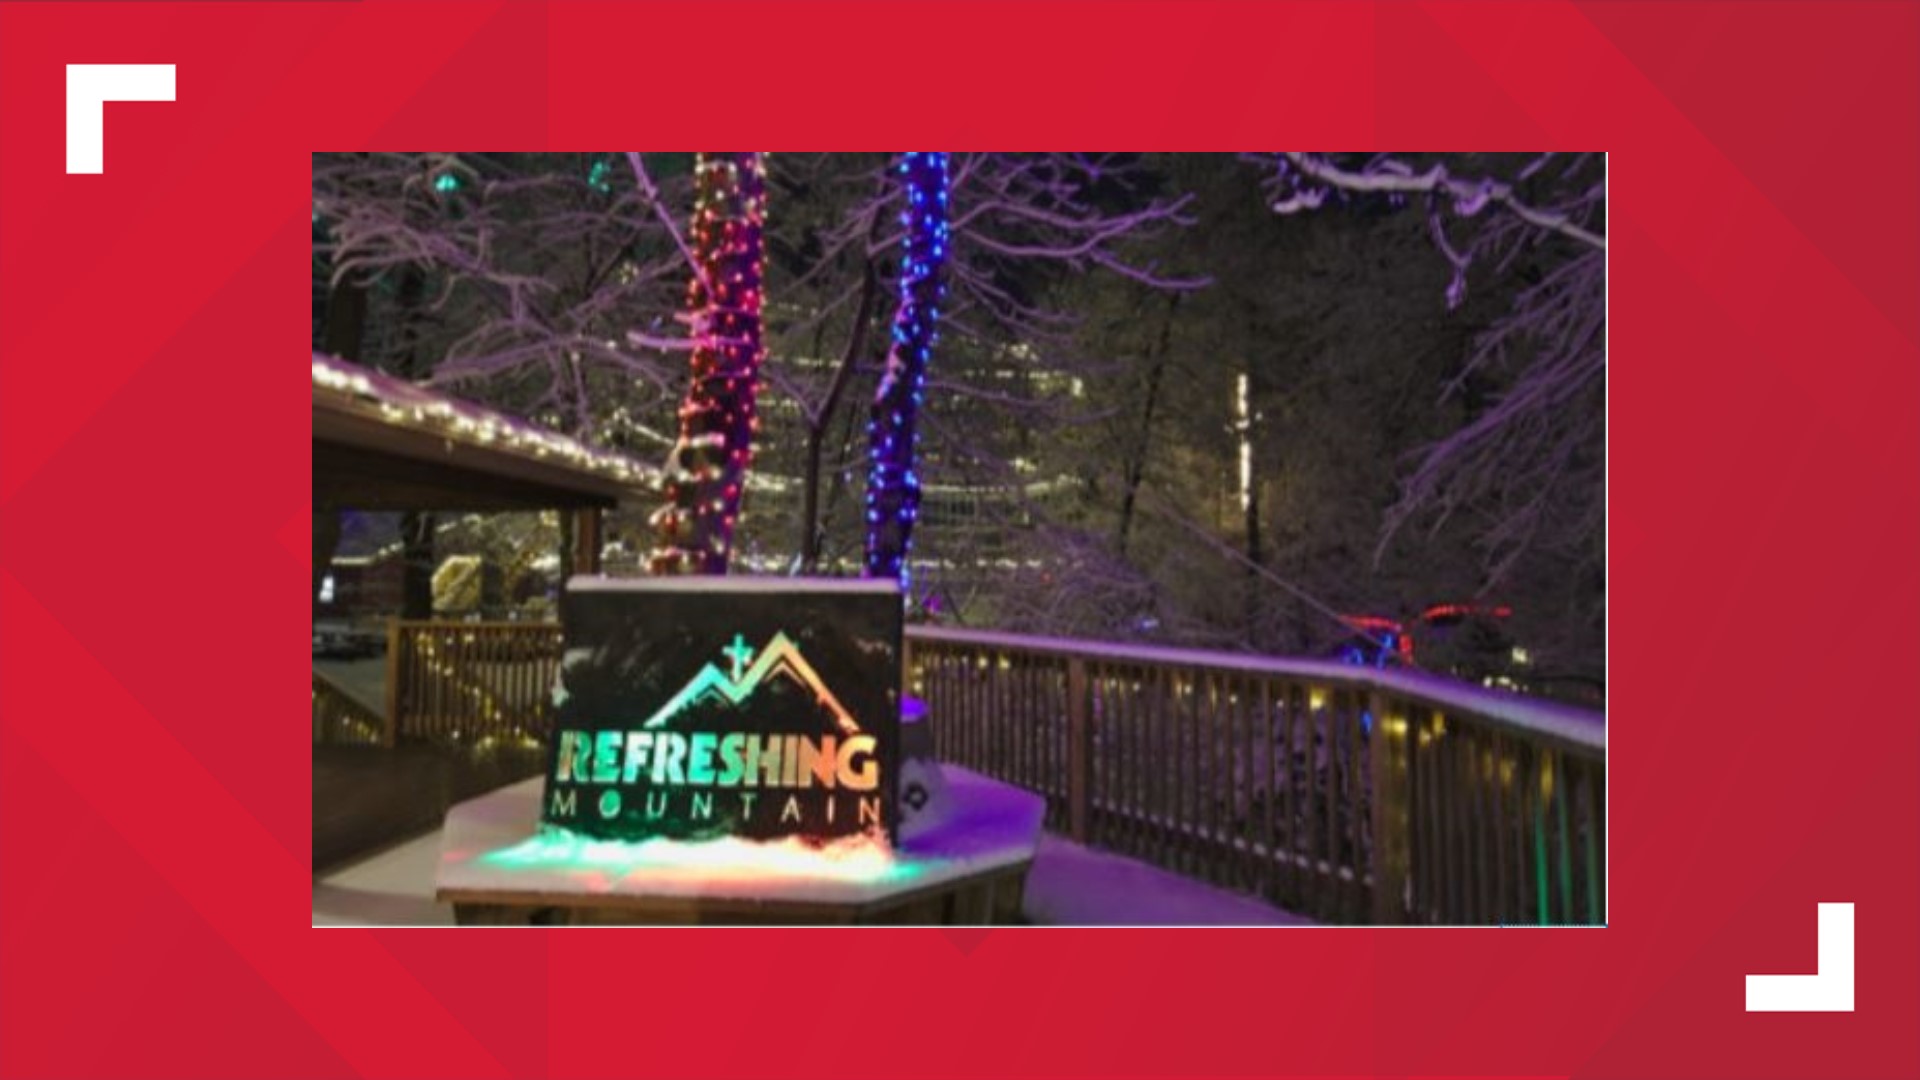 Refreshing Mountain will highlight 7 local non-profits during their holiday experience.